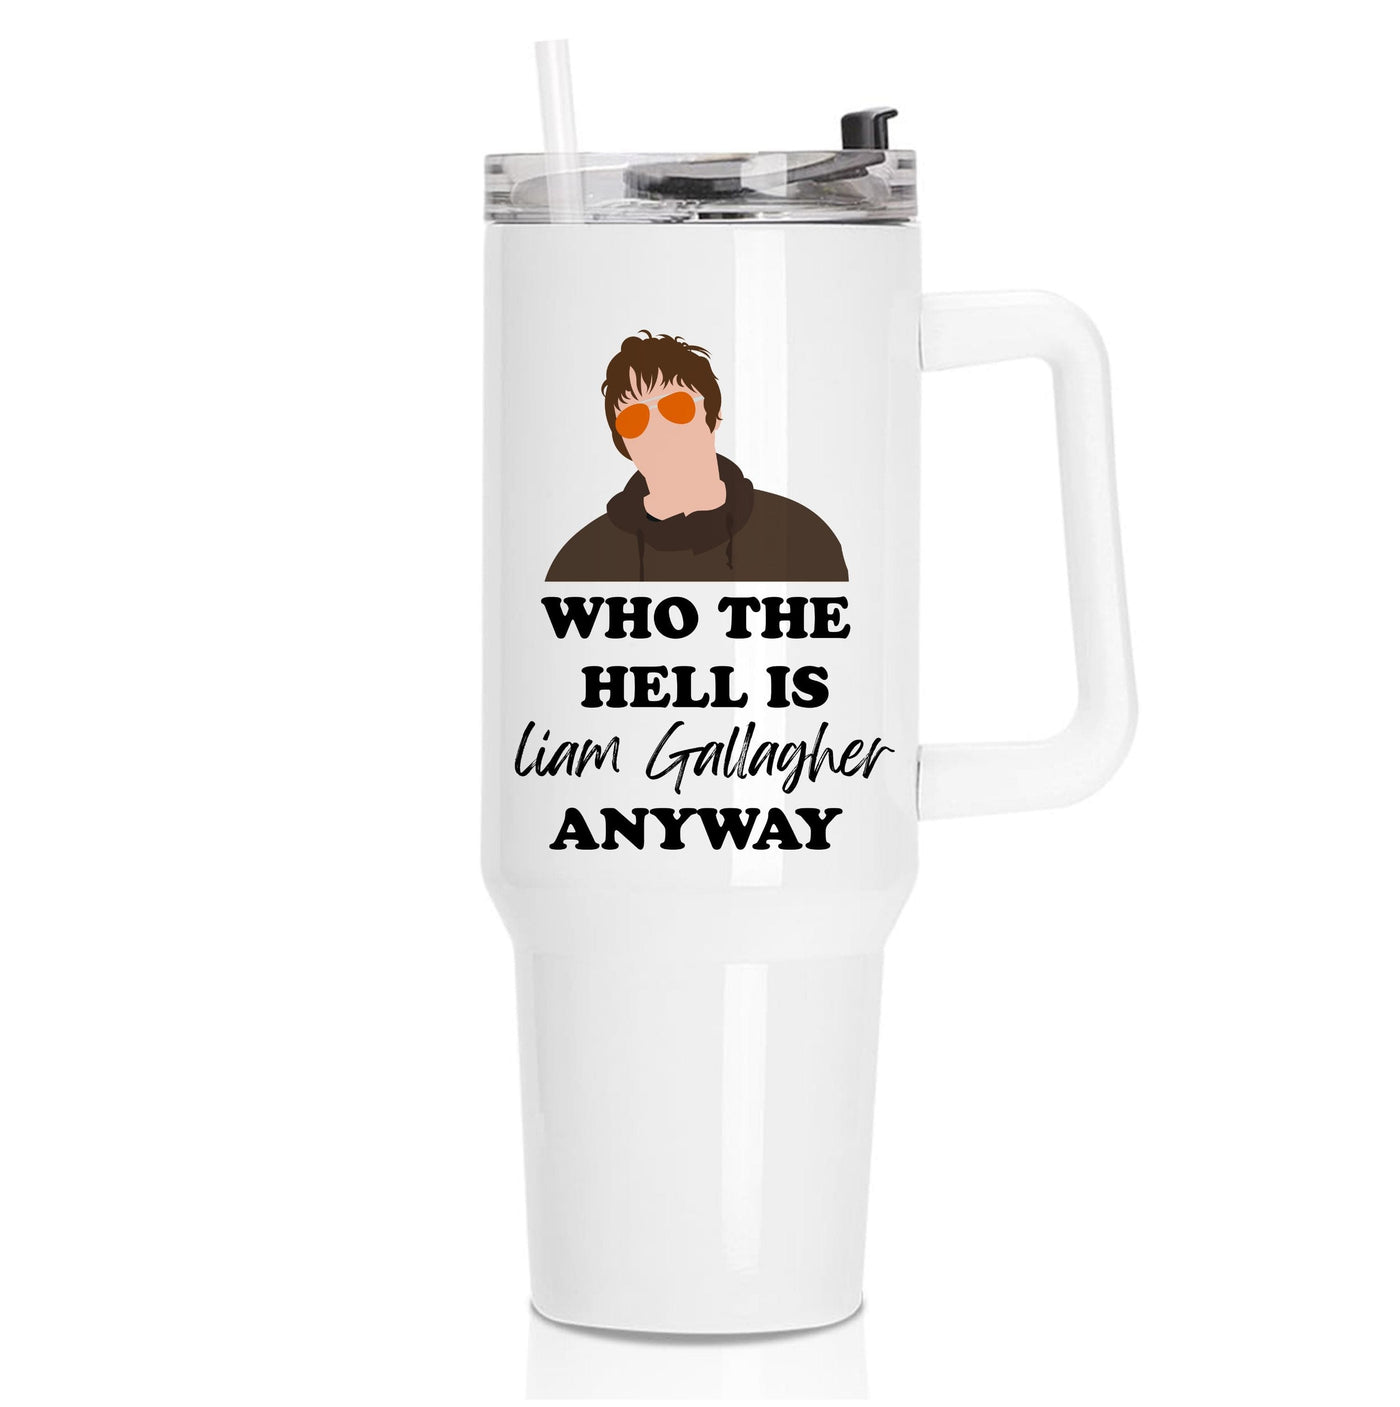 Who The Hell Is Liam Gallagher anyway - Festival Tumbler